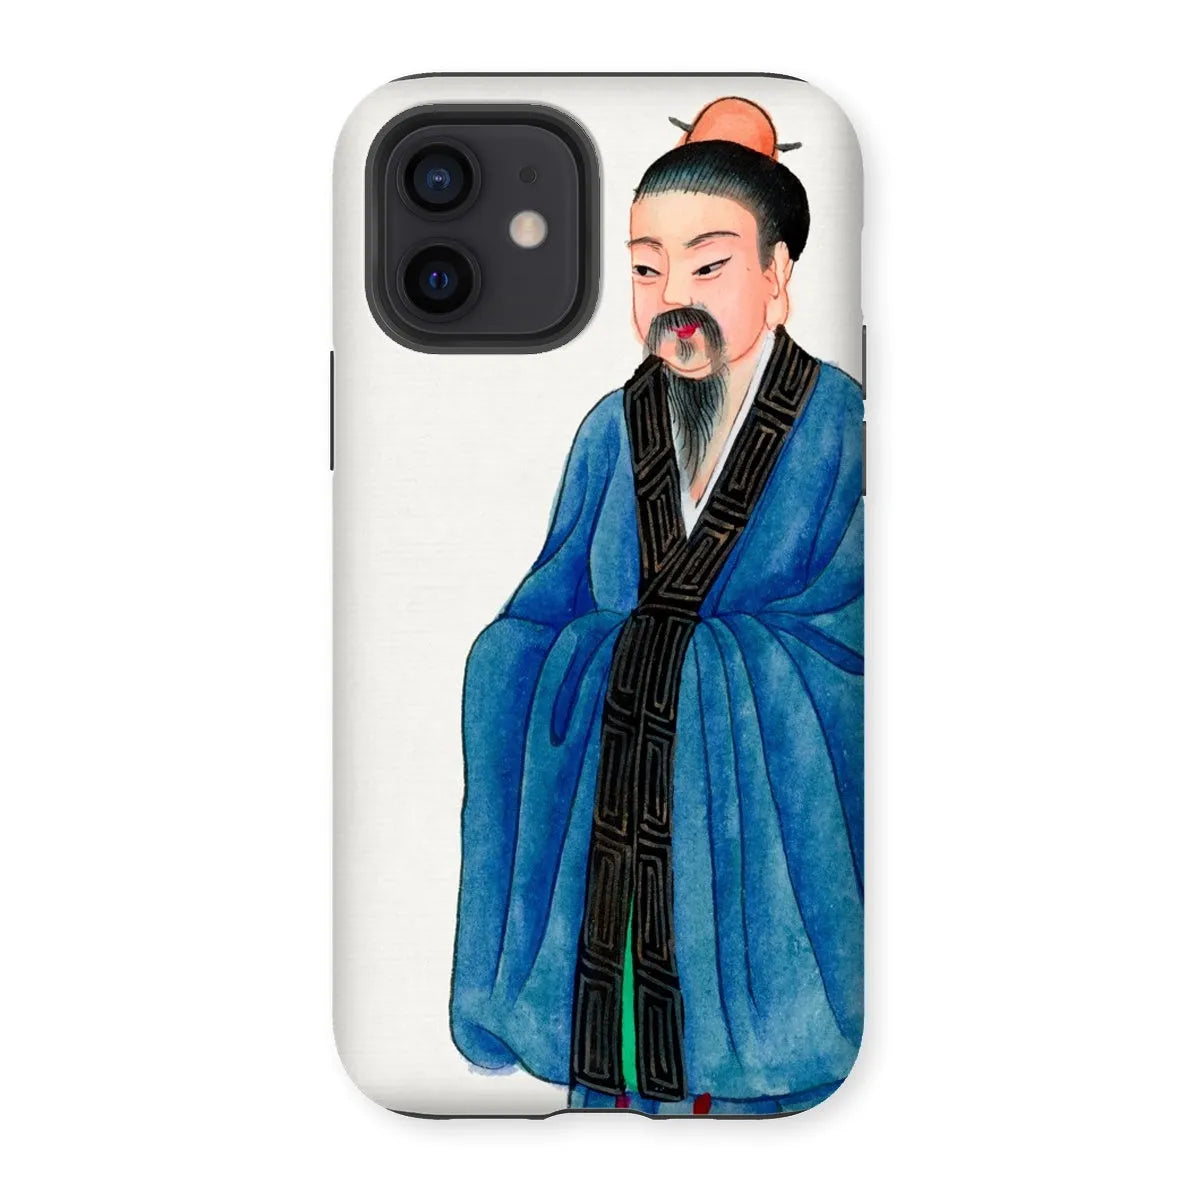 Grand Master - Chinese Buddhist Aesthetic Art Phone Case - Iphone 12 / Matte - Mobile Phone Cases - Aesthetic Art